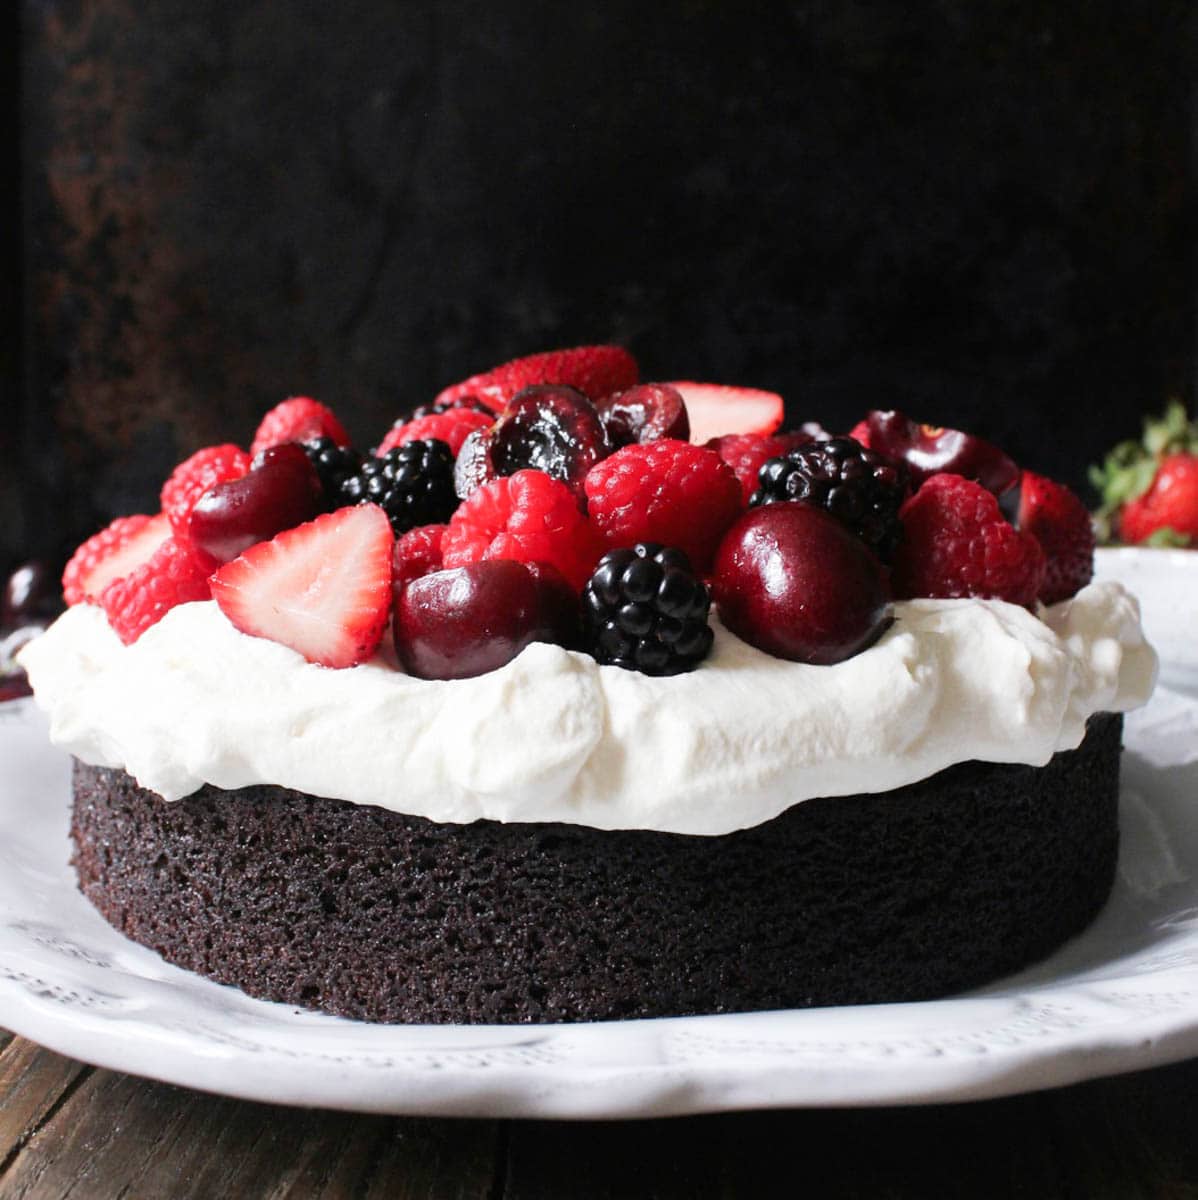 Foolproof-Chocolate-Cake-With-Whipped-Cream-and-Berries-20